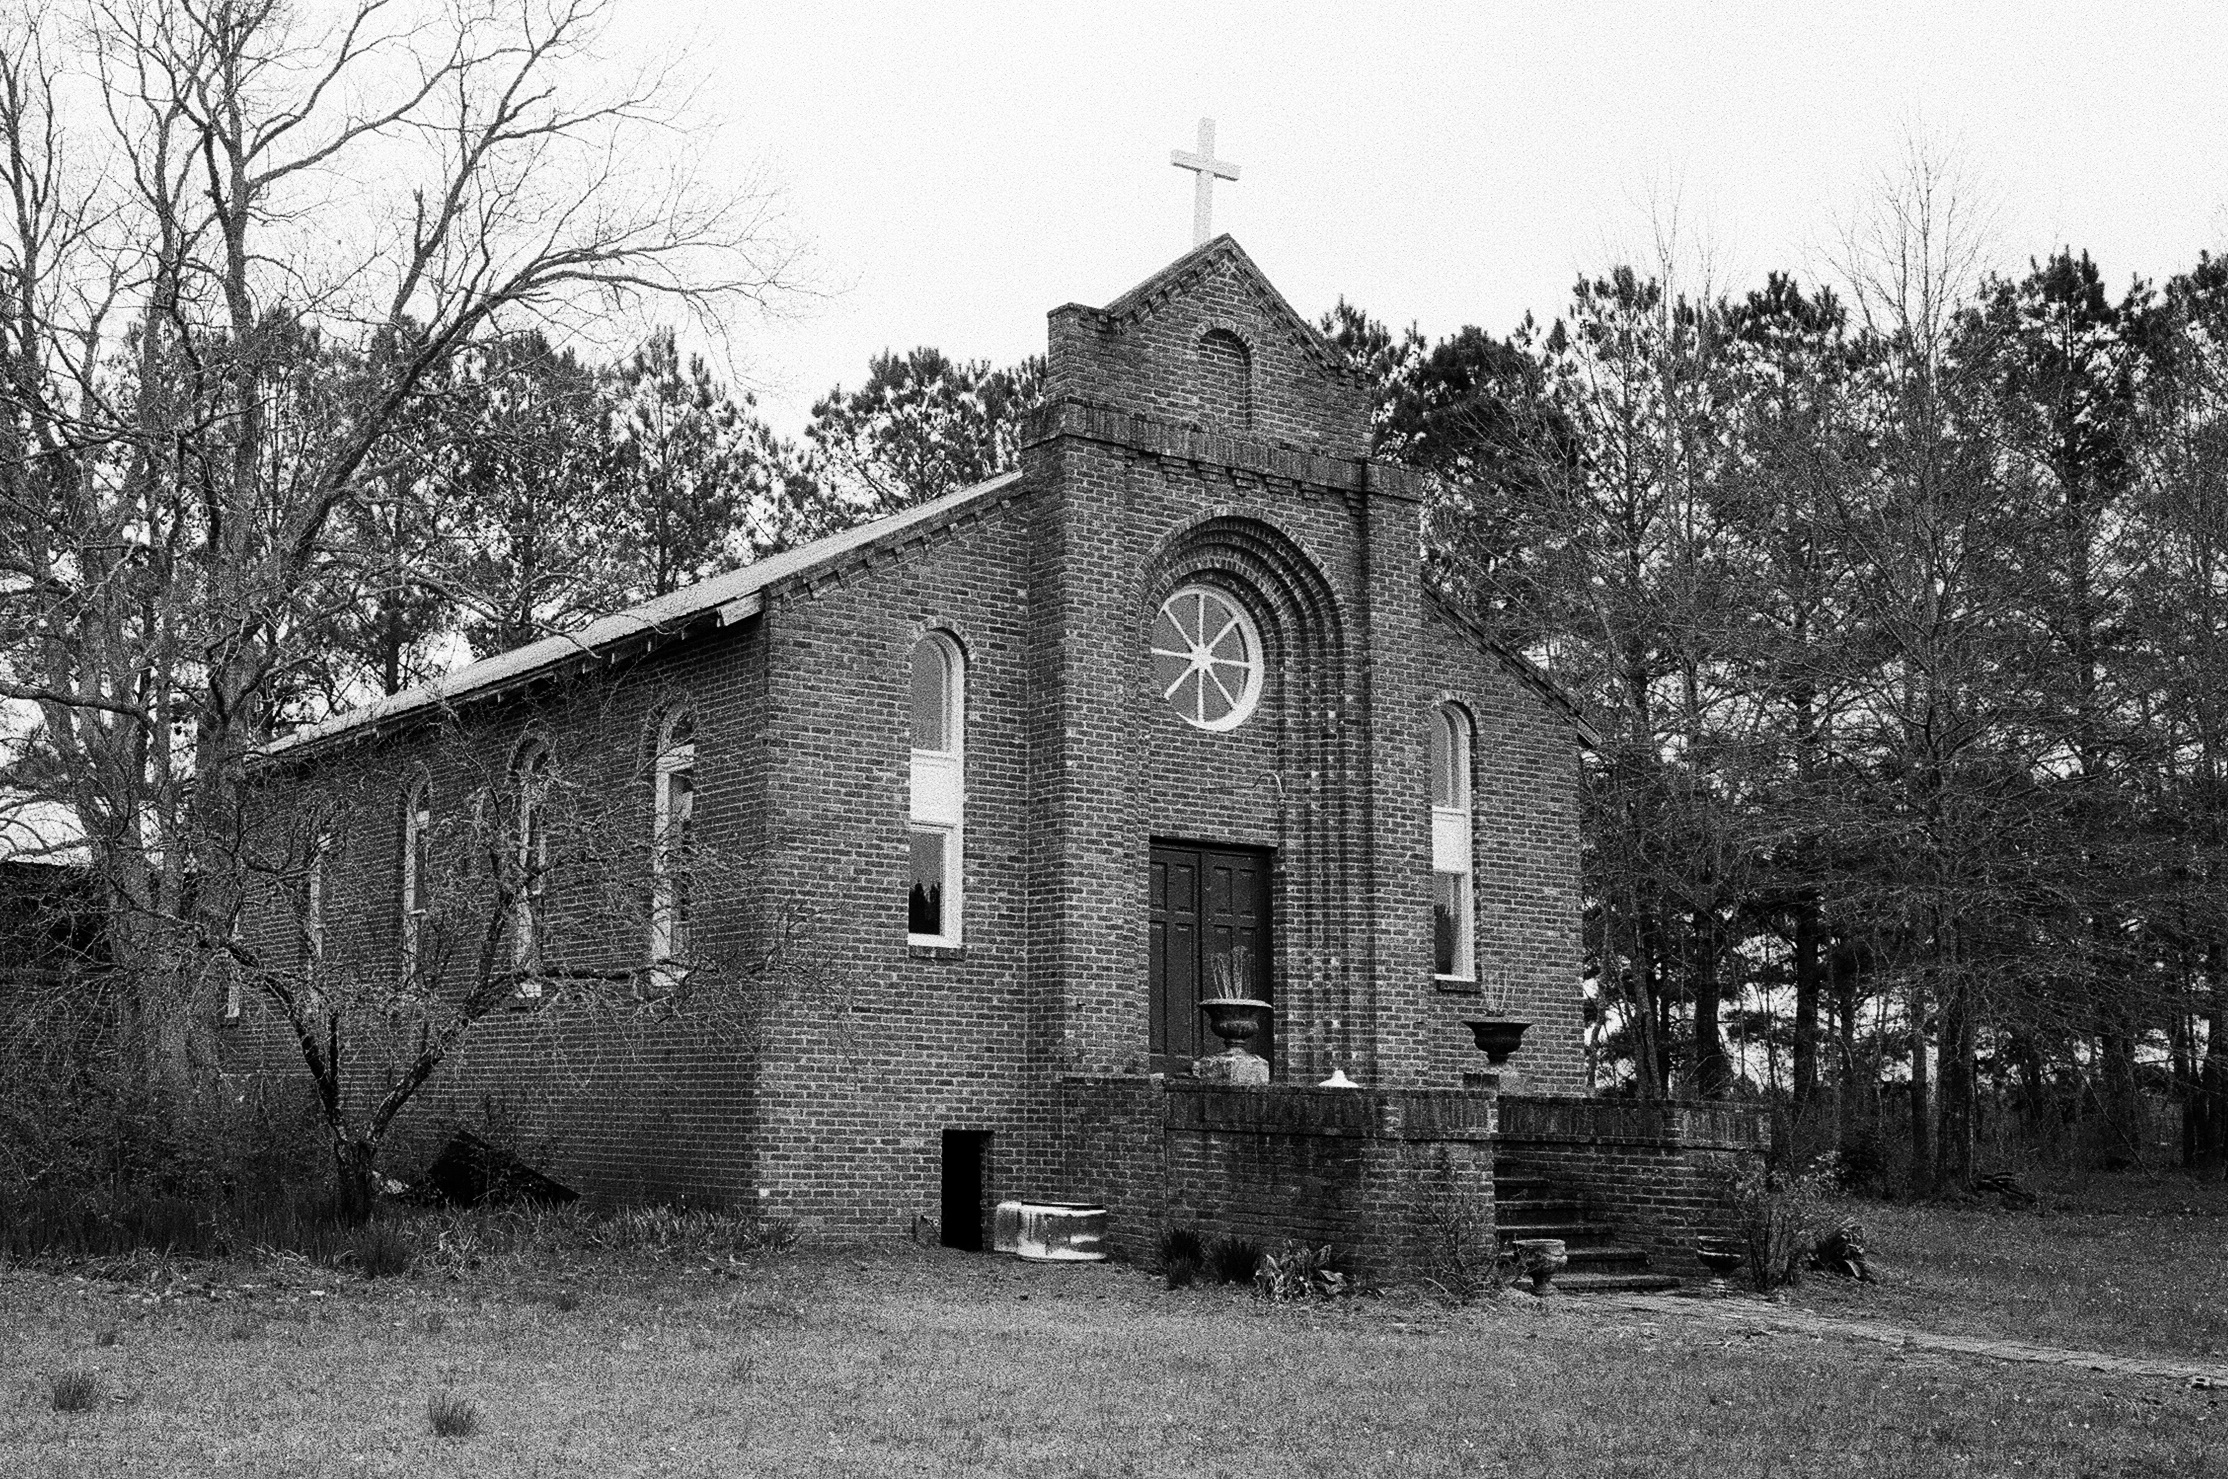  St. Anne's church off Highway 16 between Canton and Benton, Mississippi - captured on Ilford HP5 Plus using a Contax G2 rangefinder camera with Contax 28mm Carl Zeiss lens 